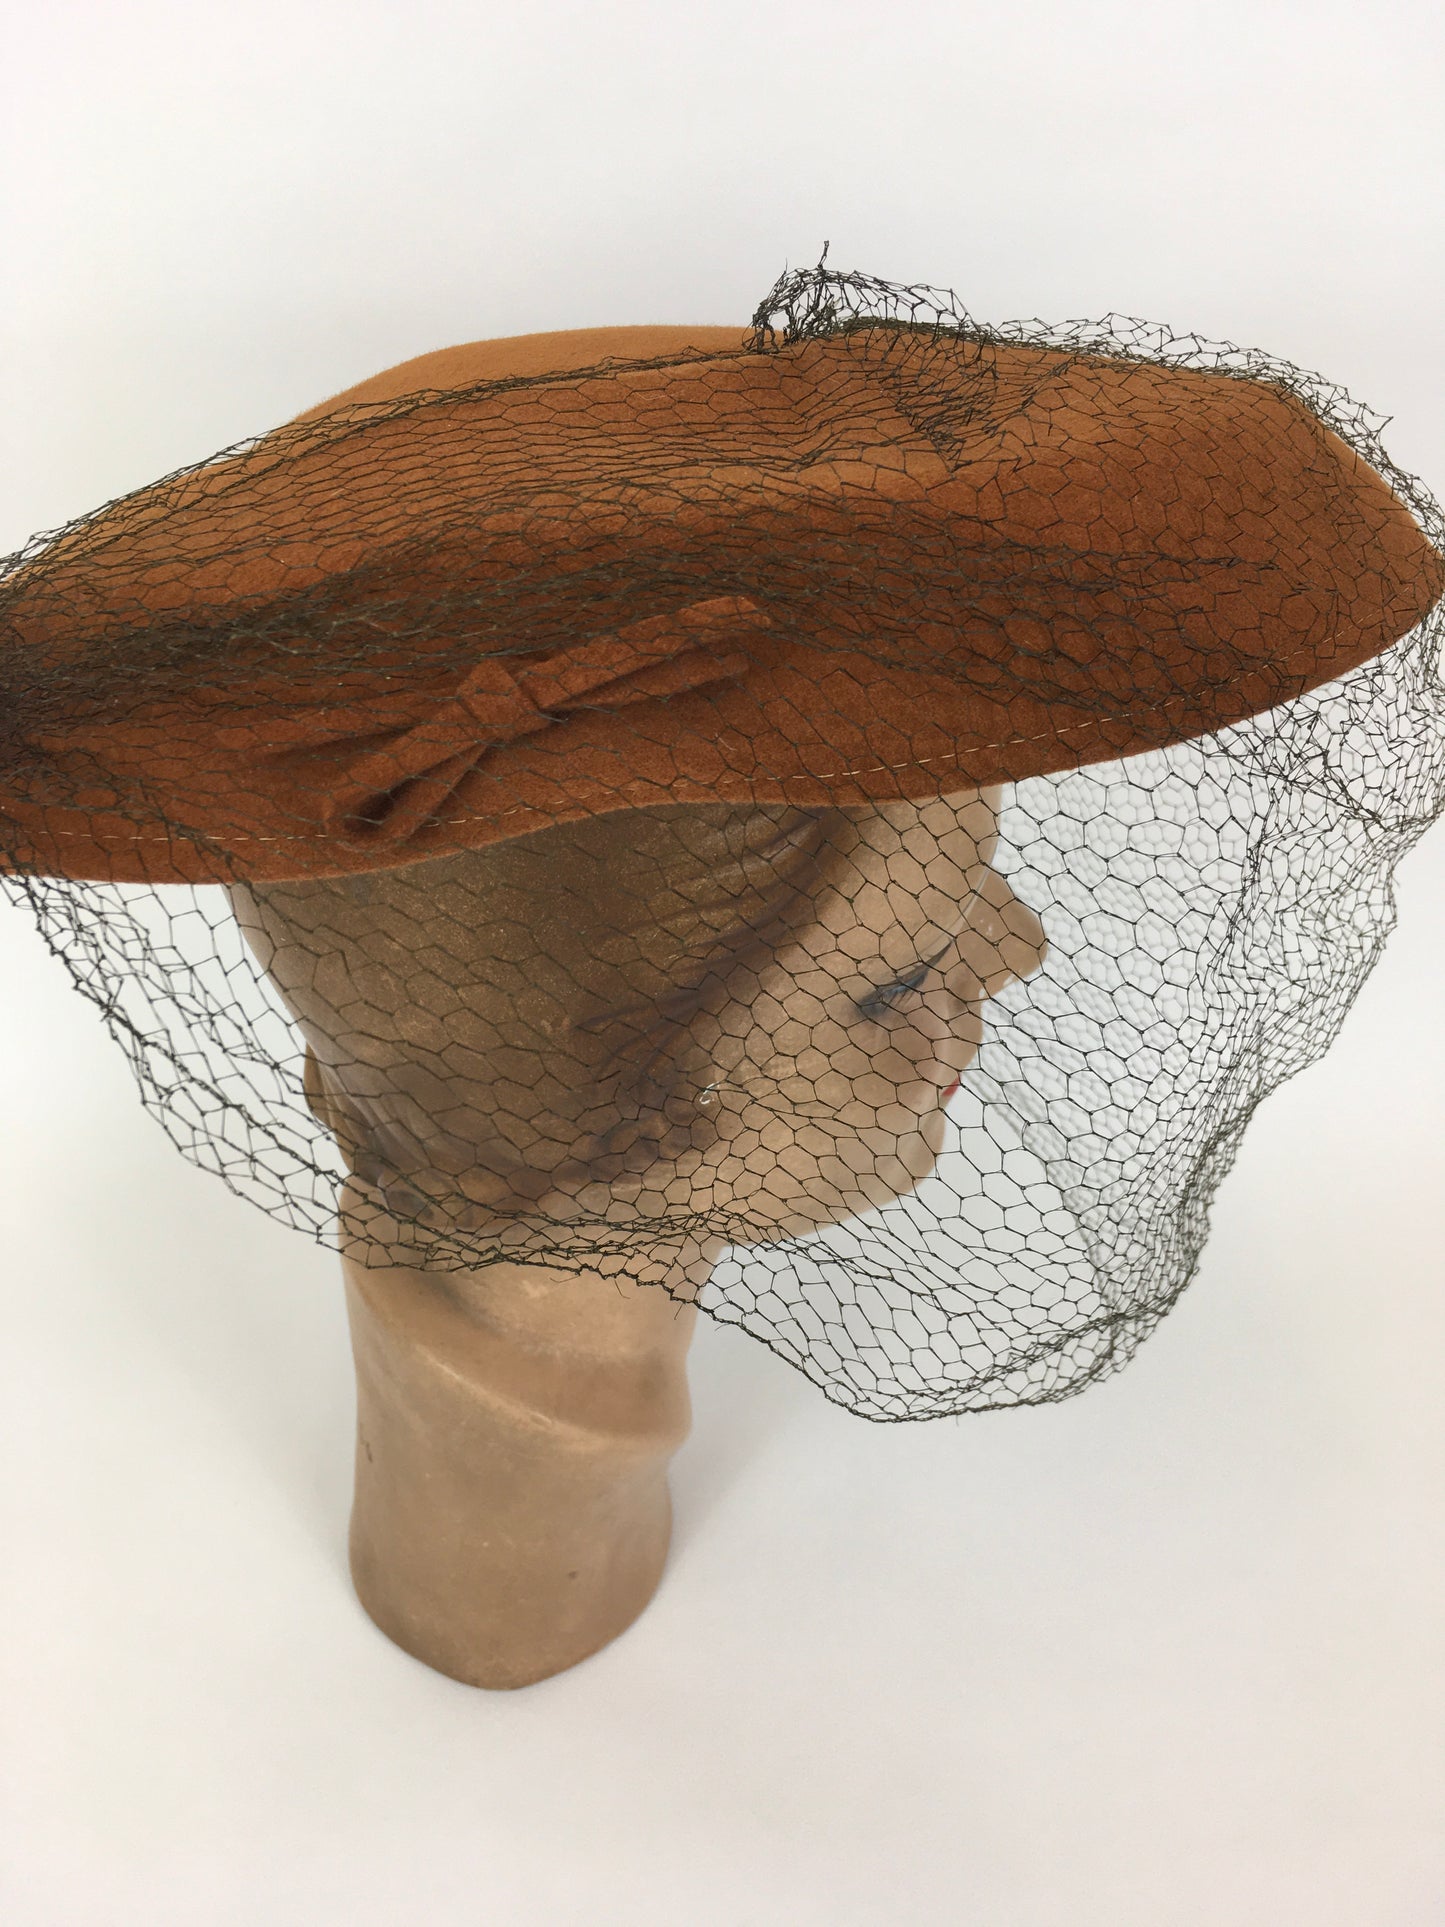 Original SENSATIONAL 1940’s Cinnamon Platter Hat - With Bow and Veiling Detailing